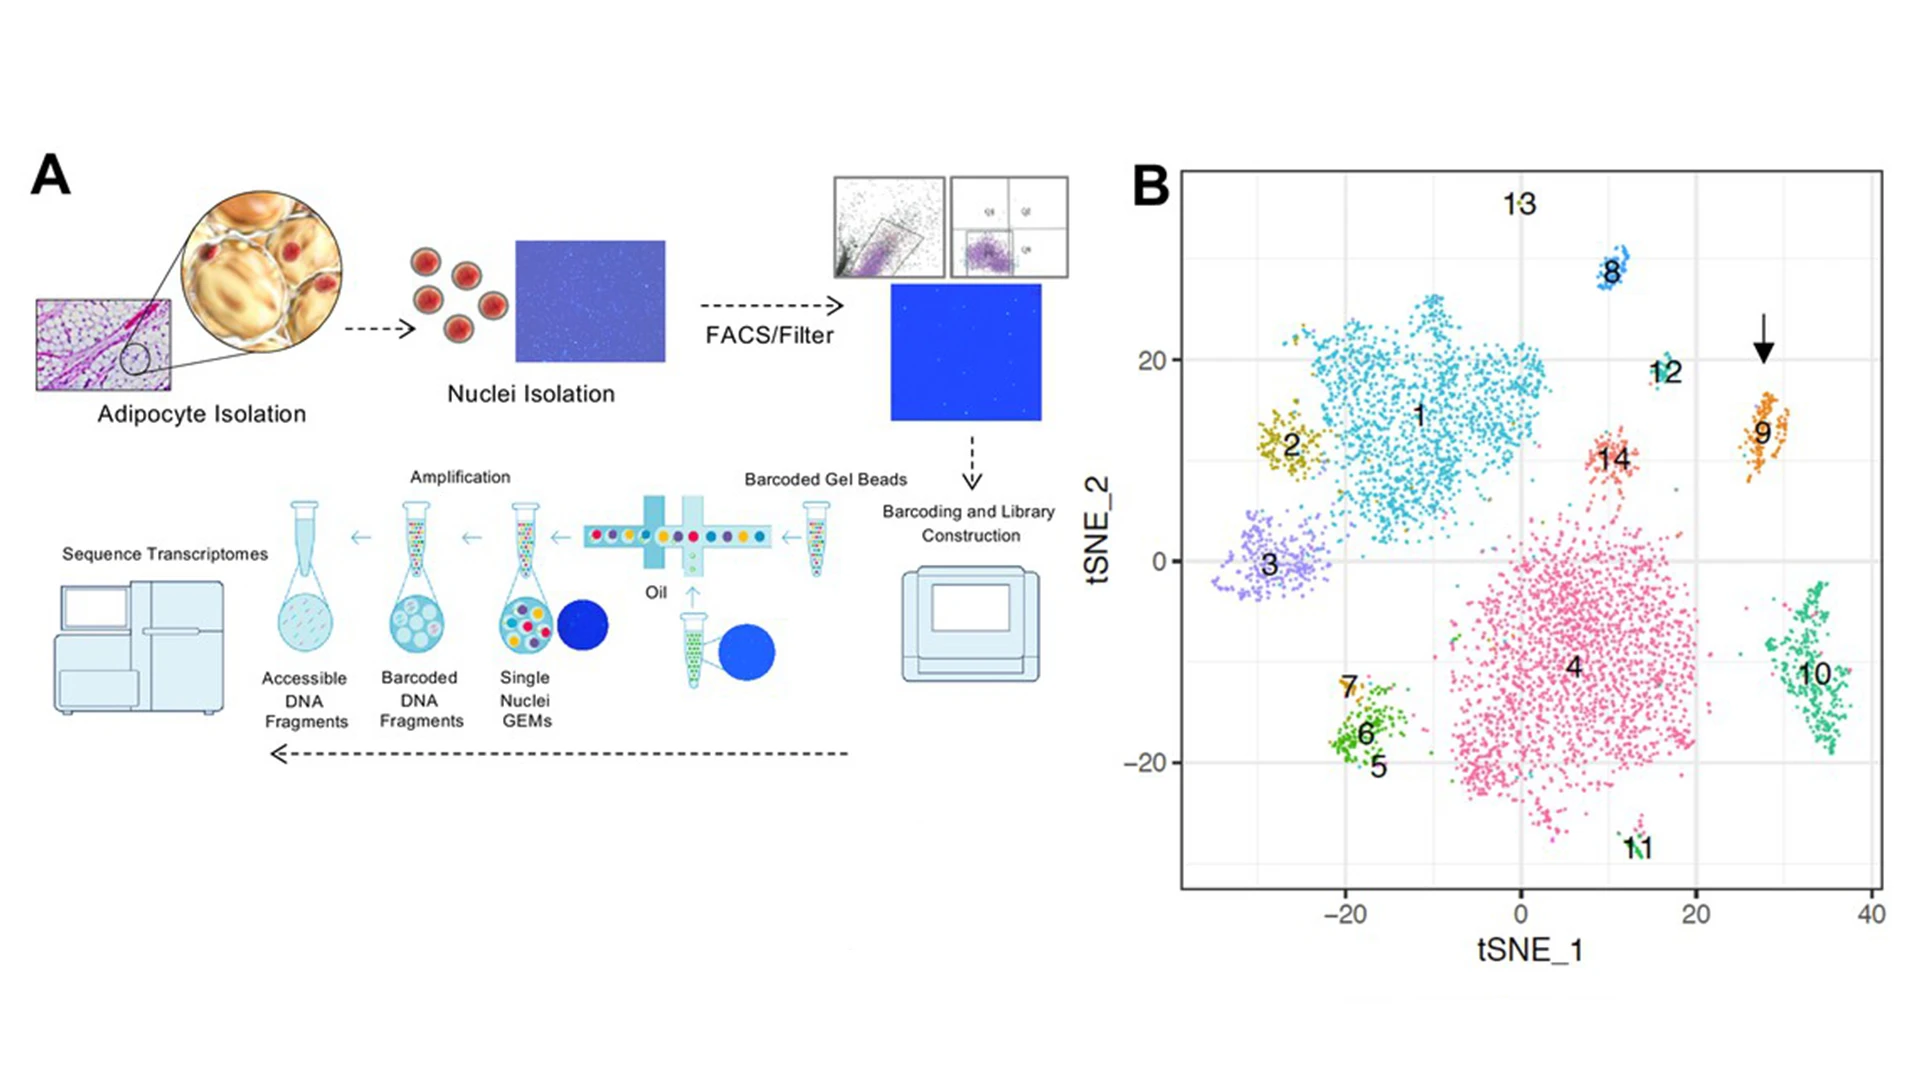 (A) Workflow showing adipocyte nuclei that underwent single nuclei microfluidic partitioning and library preparation followed by sequencing. (B) tSNE-plot showing 17 clusters from 6,000 adipocytes derived from tissues of mice. Each colored dot is an adipocyte assigned to a cluster based on transcriptomic signature. 